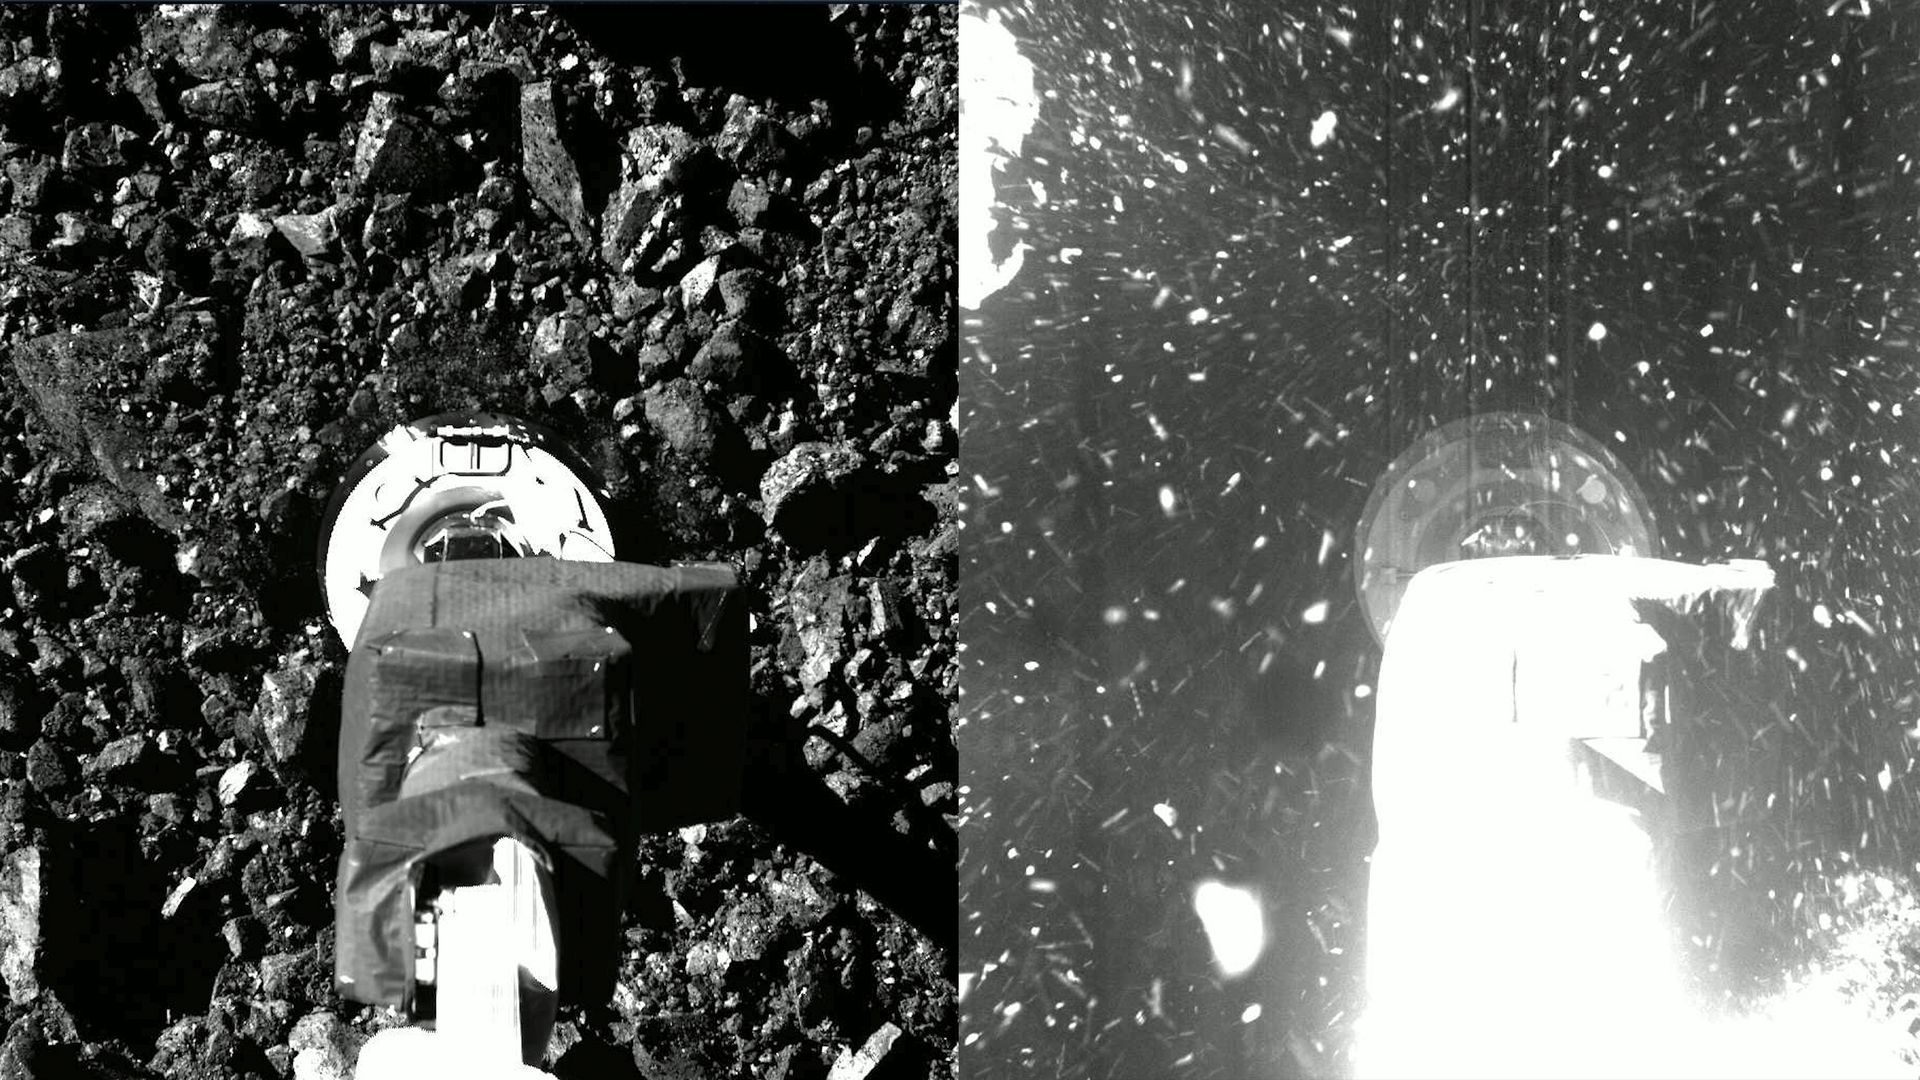 Two side by side black and white pictures showing the arm of a spacecraft touching the surface of an asteroid and kicking up particles